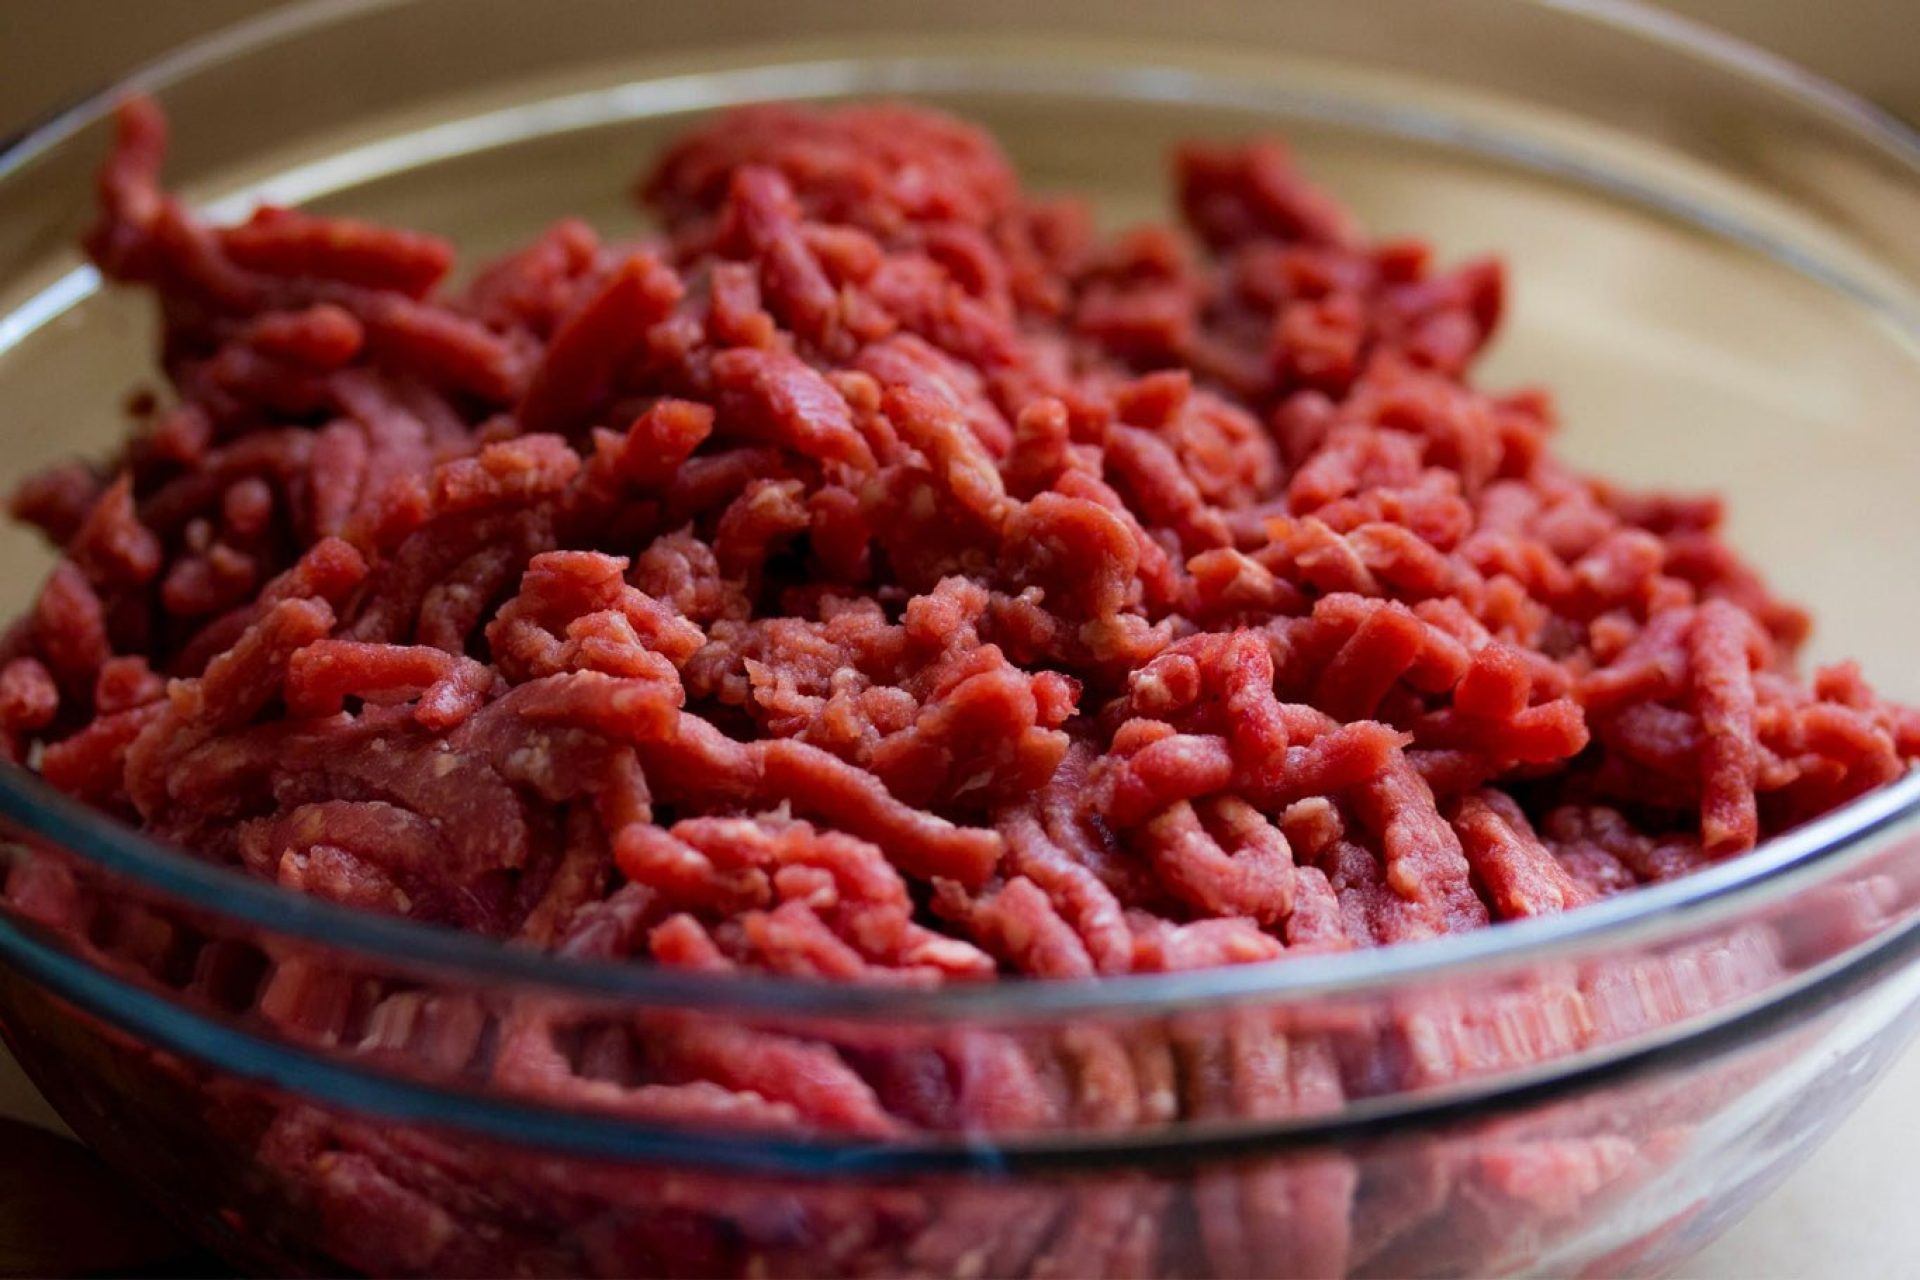 Raw Ground Beef in glass bowl